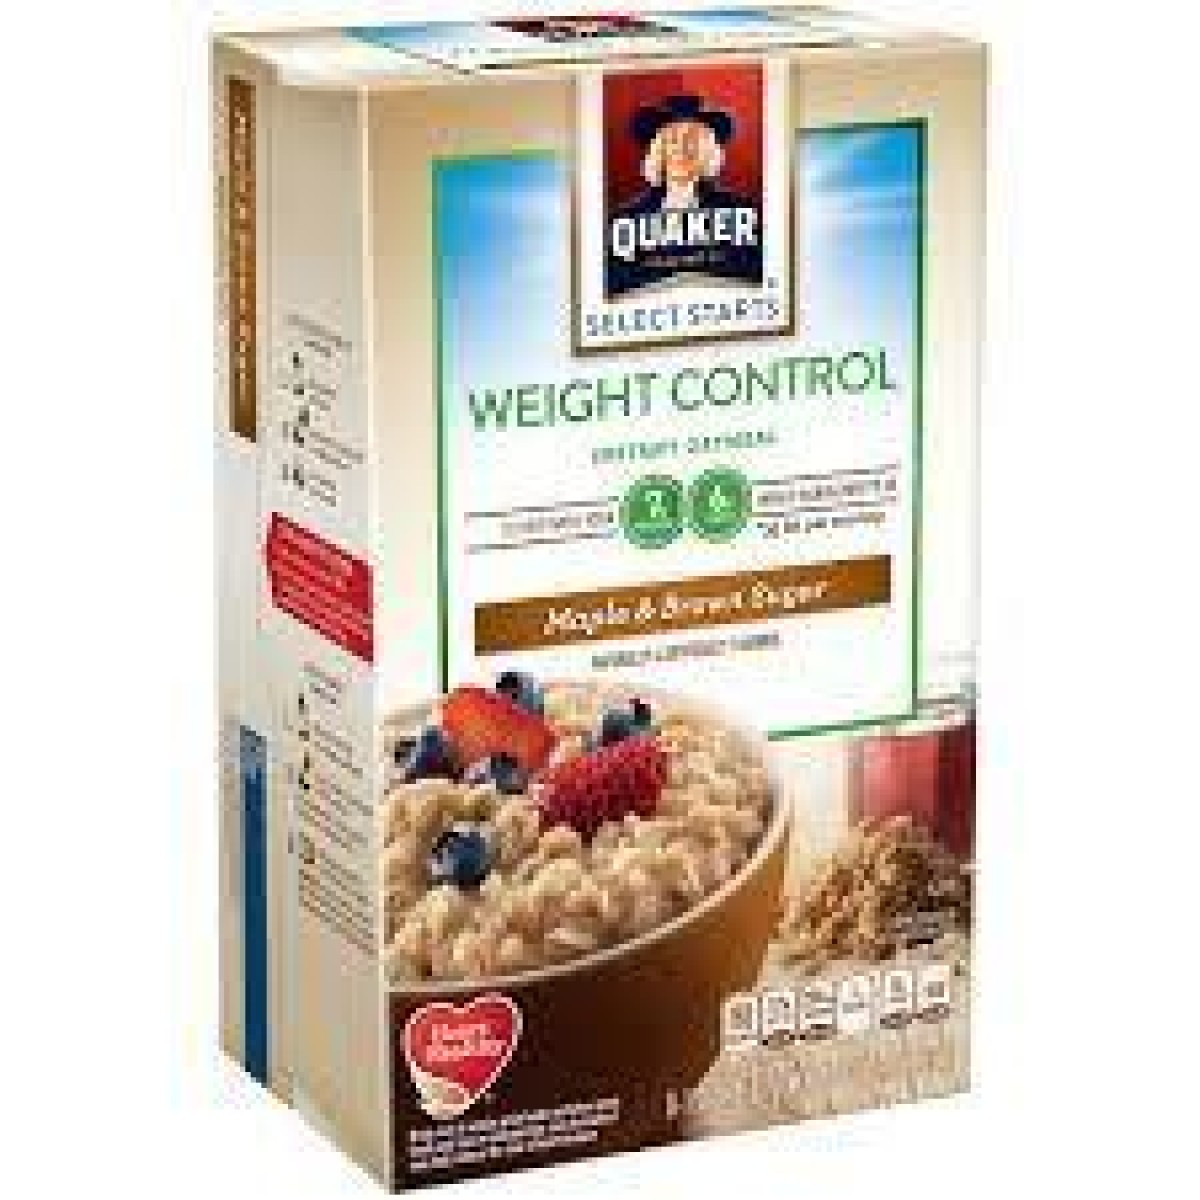 Quaker Oats Weight Control
 Quaker Instant Oatmeal Weight Control Maple & Brown Sugar